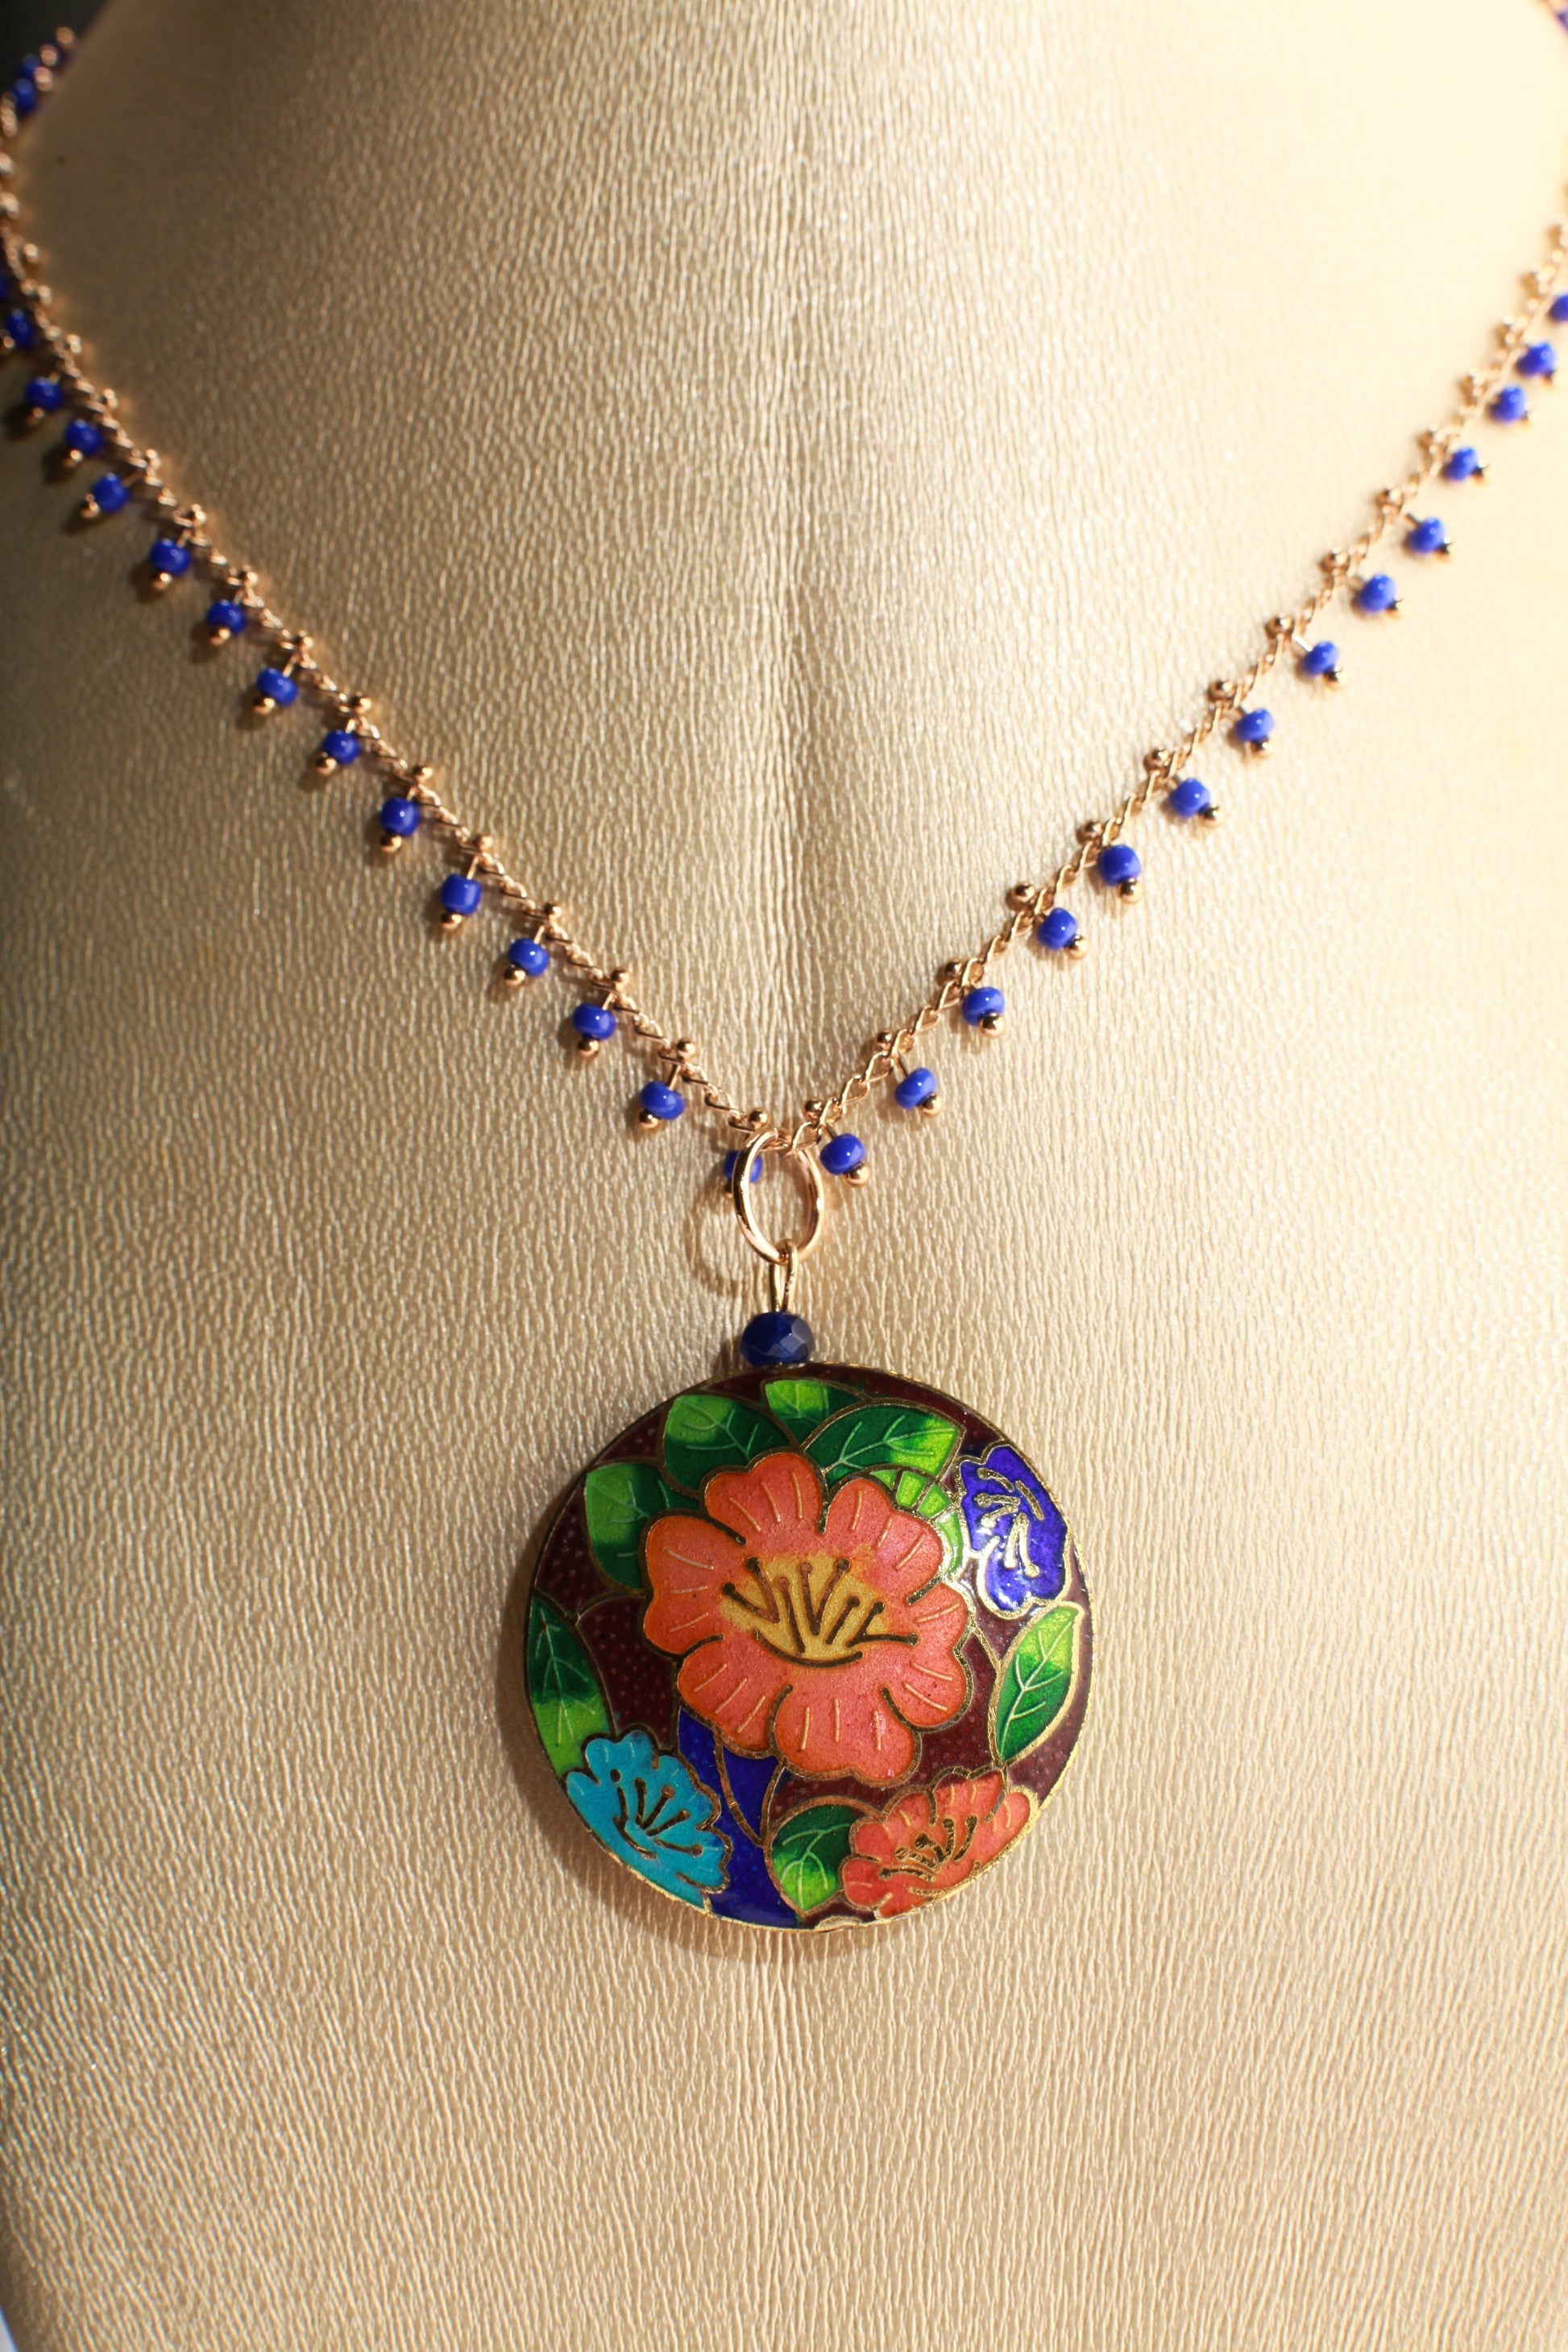 Traditional Cloisonné Pendant Double Sided Vintage Floral Flowers Pink Focal with Beaded Chain Necklace 20"